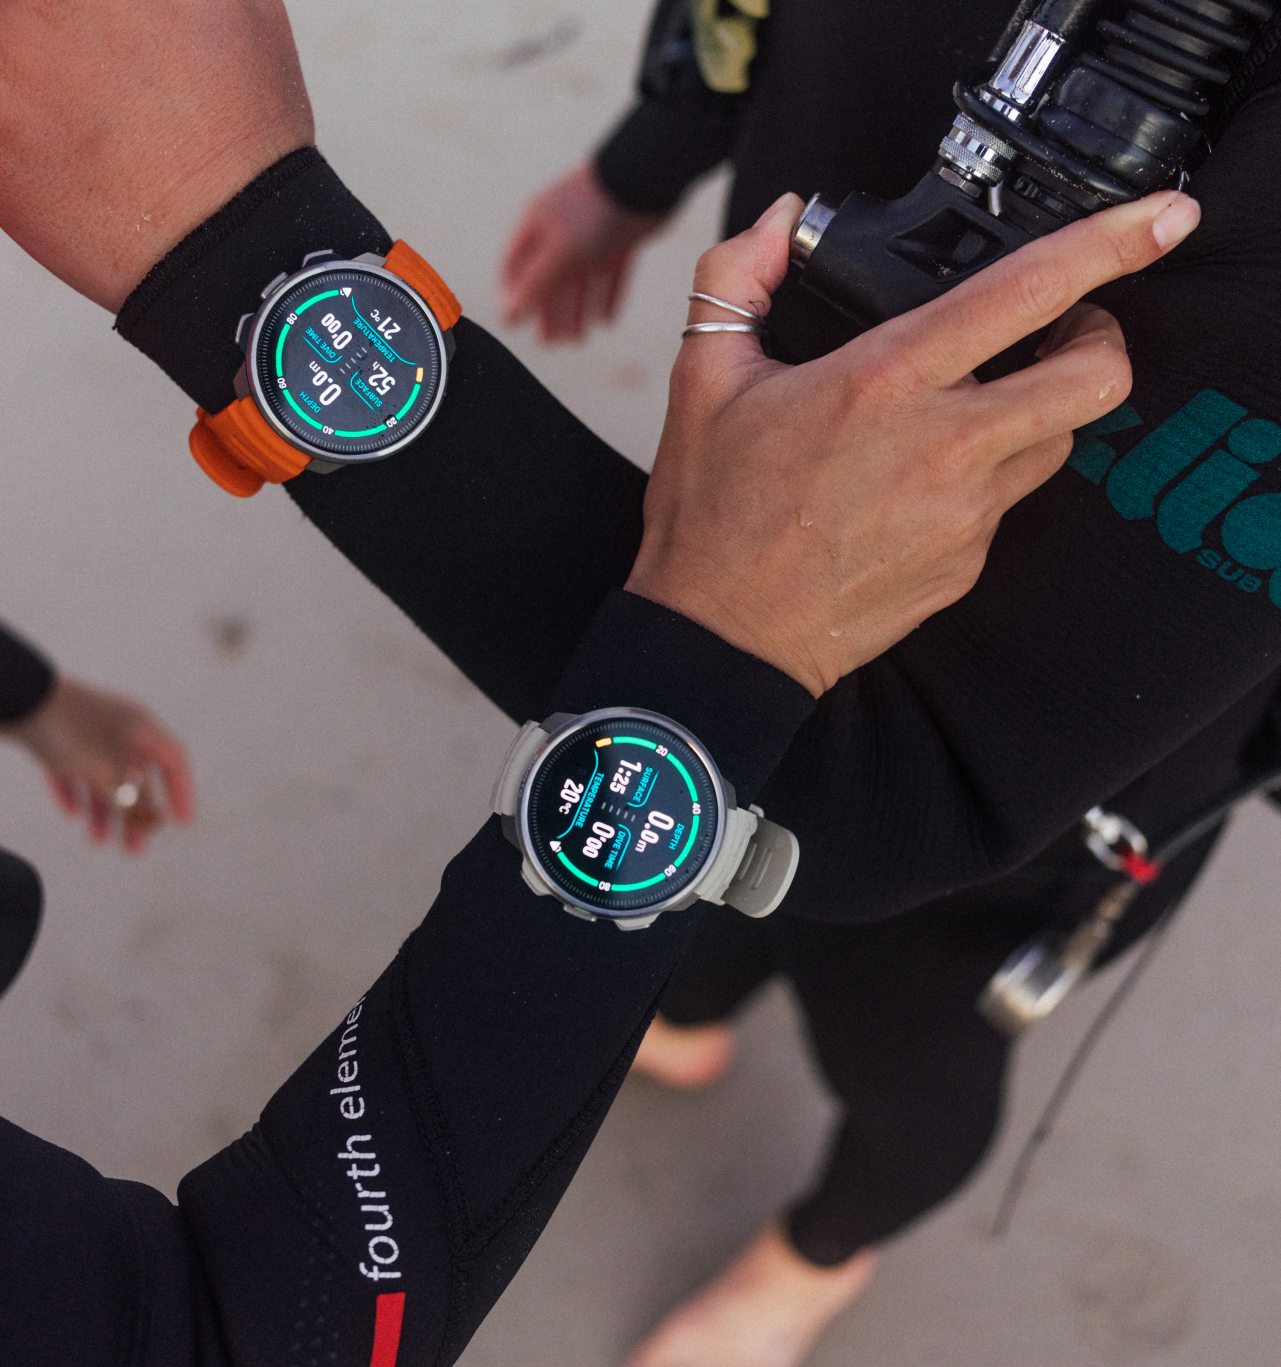 Suunto back in game with Ocean dive-computer / sports watch